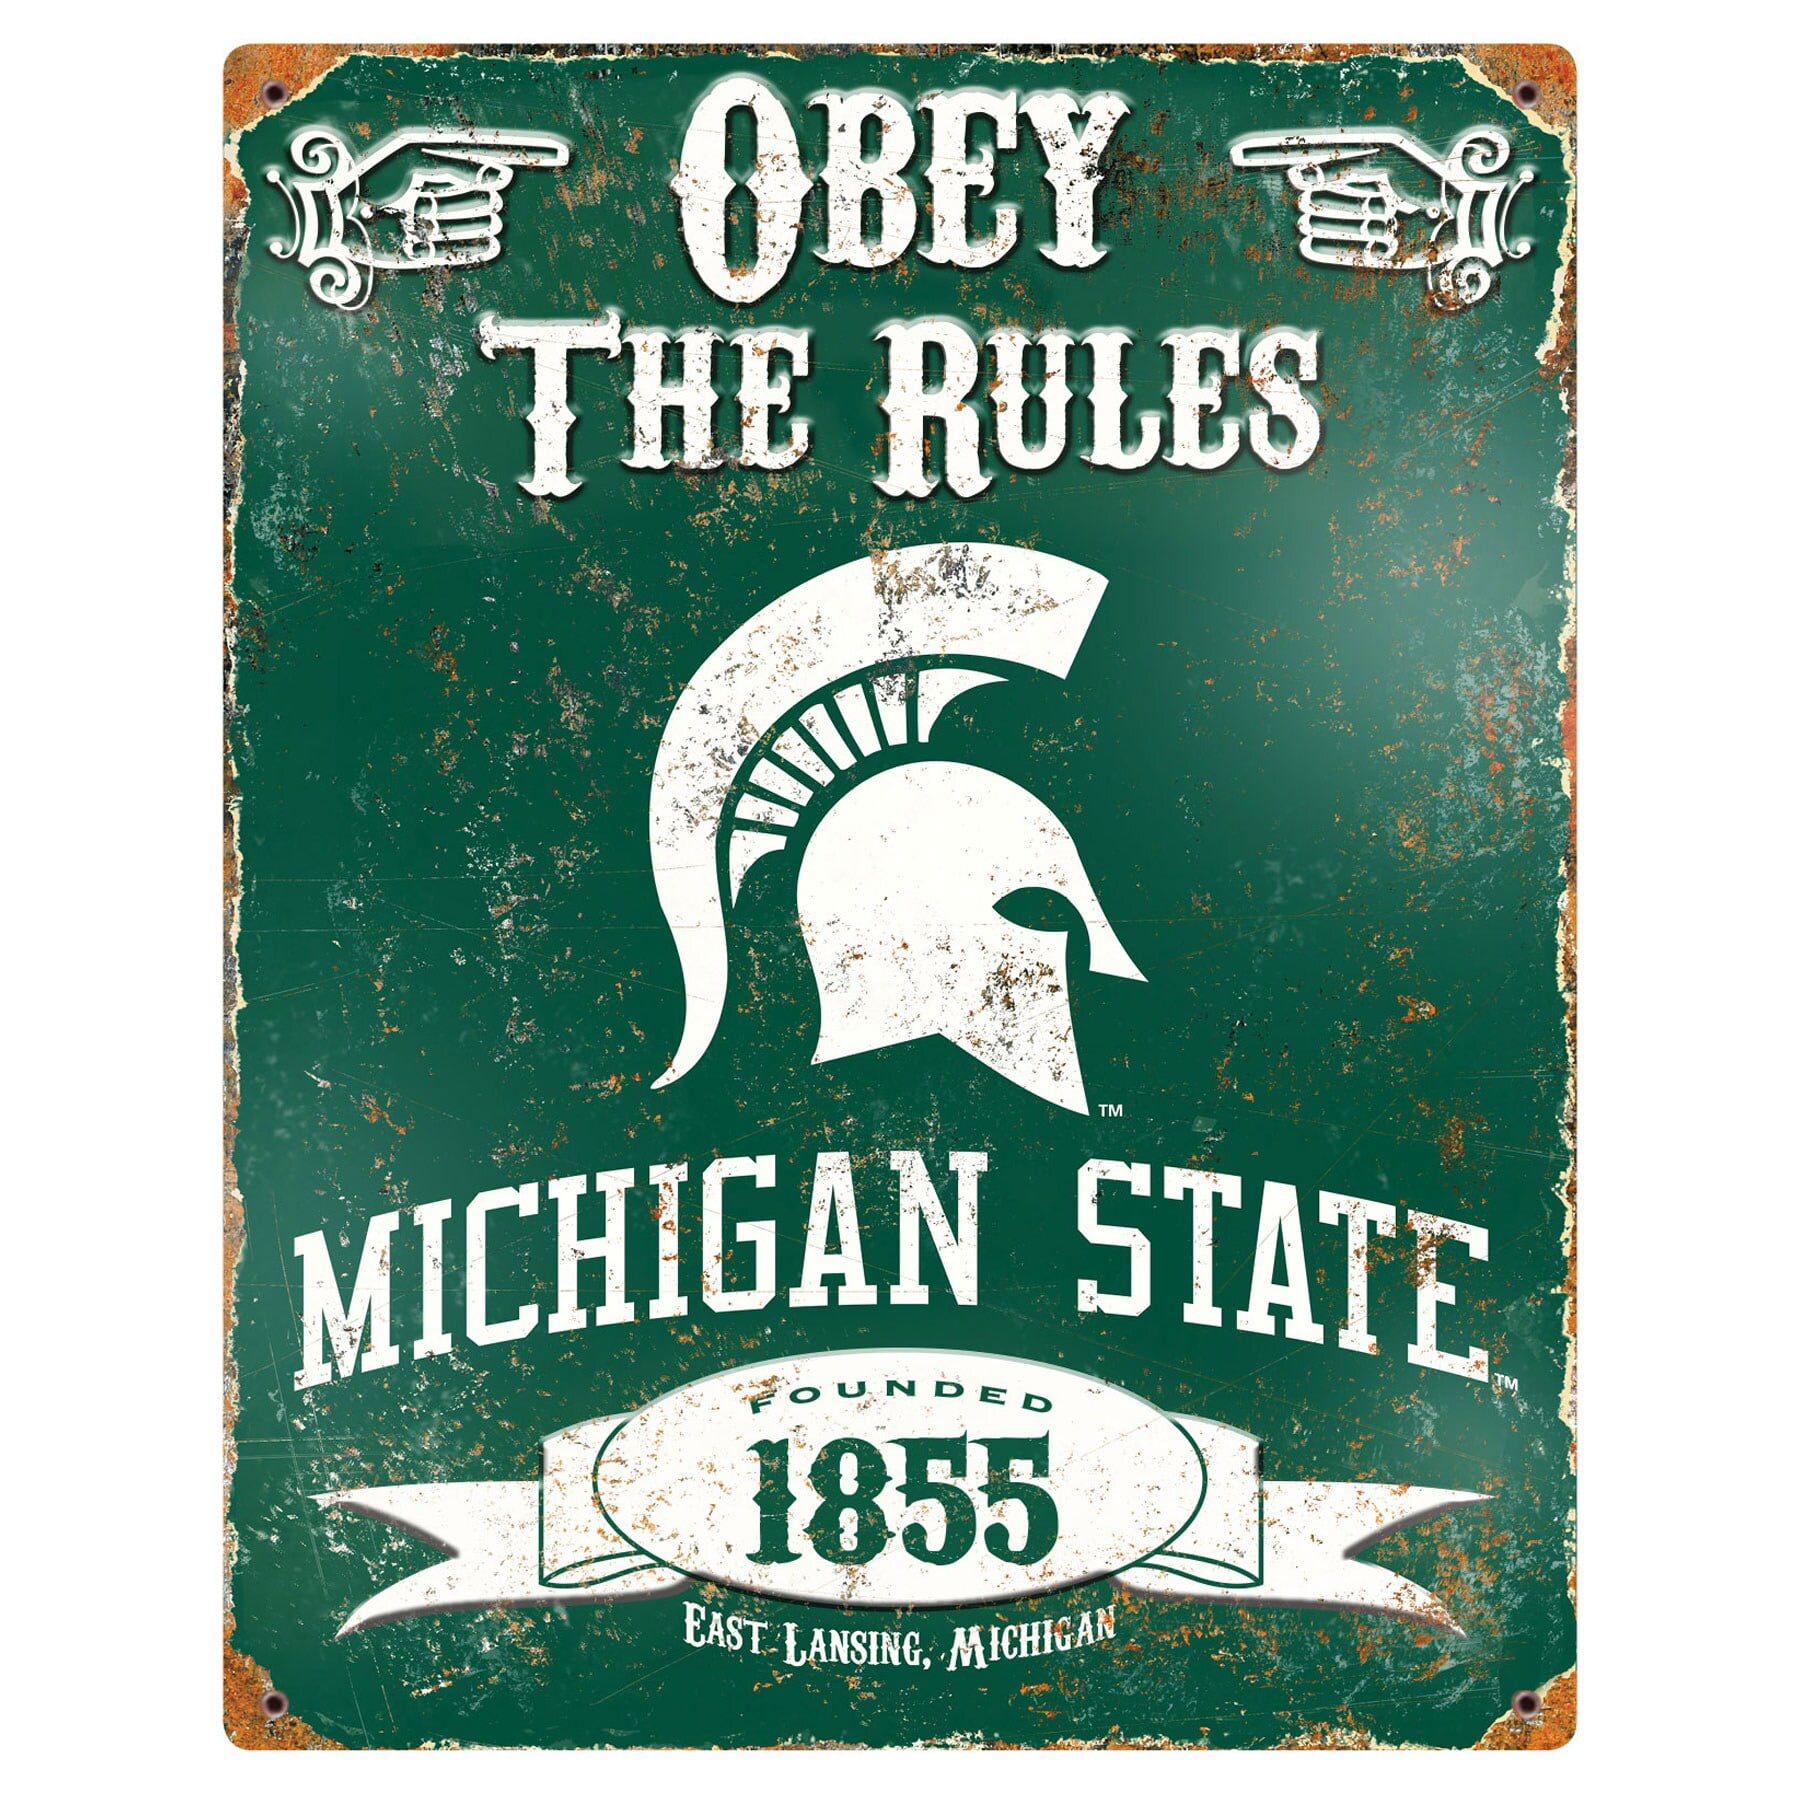 Michigan Spartans Green and White Football 6"x12" Aluminum License Plate Sign 